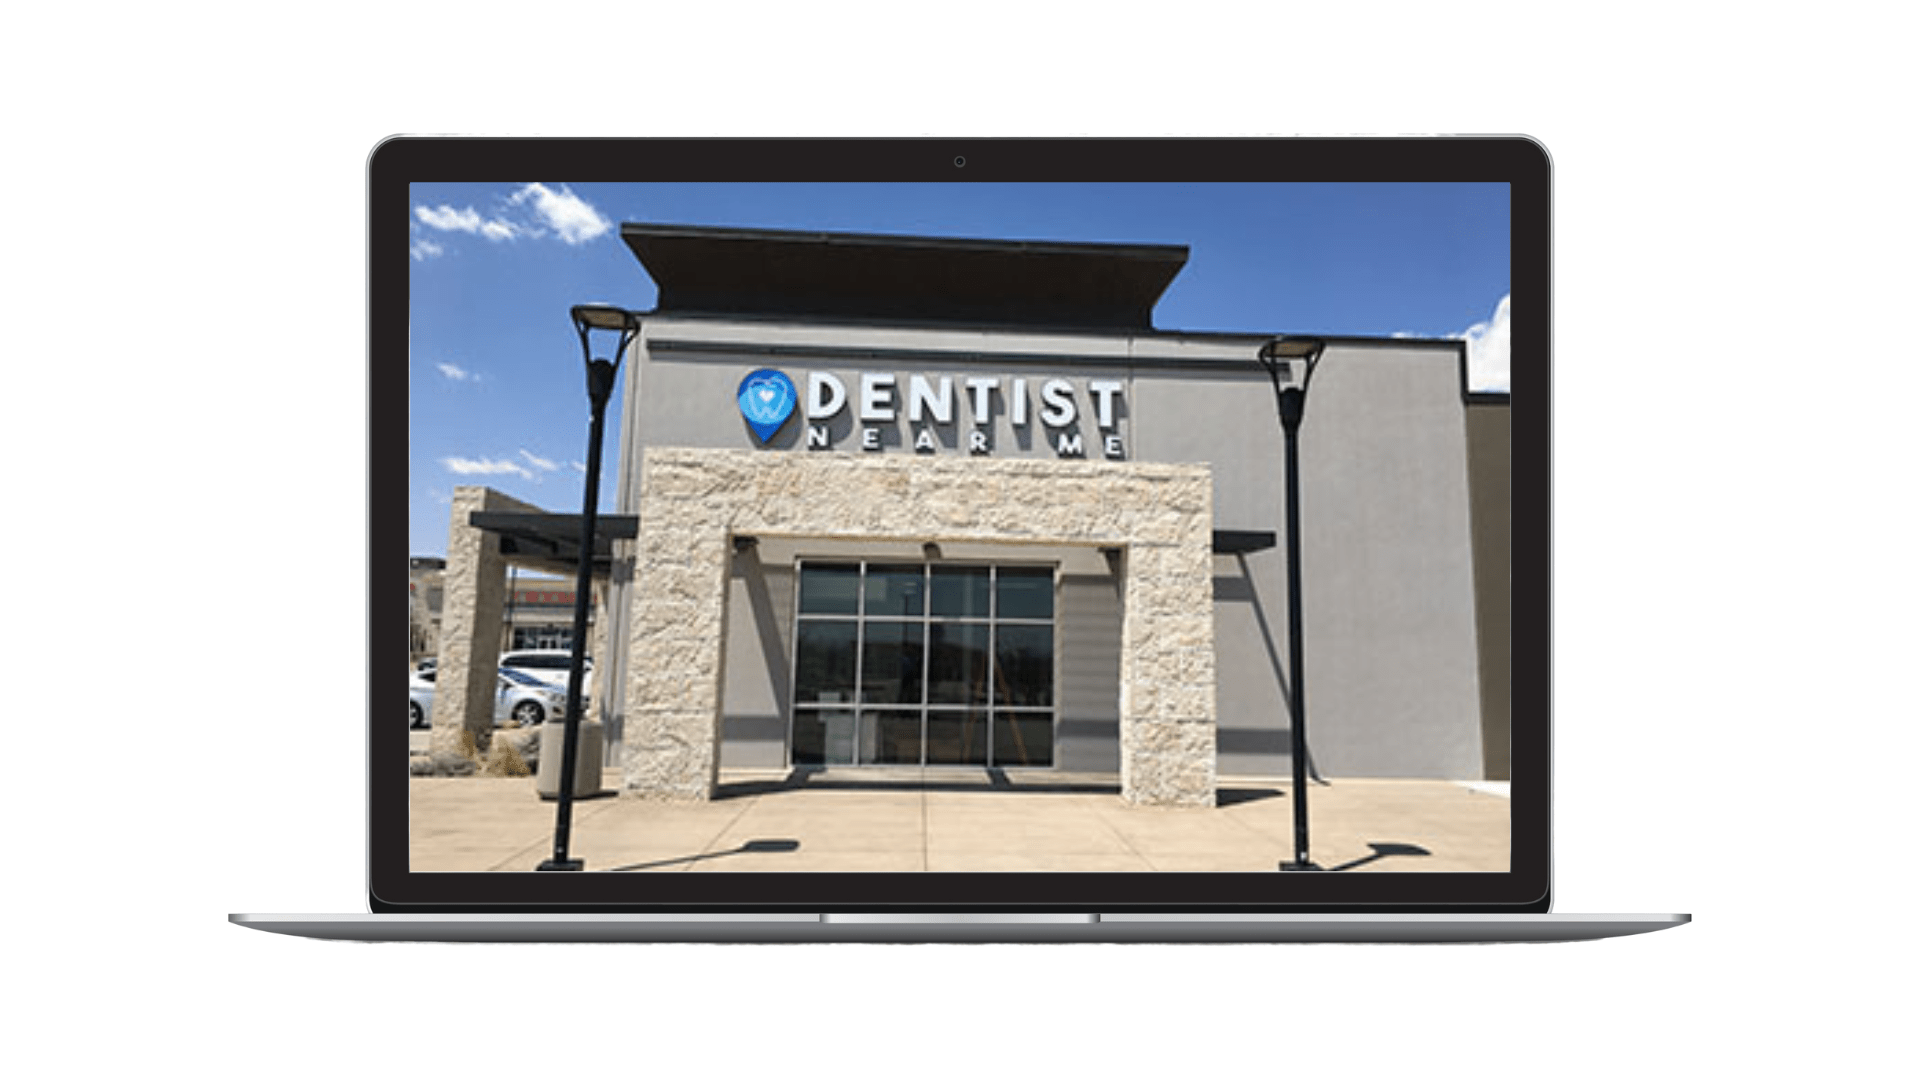 Image of Dentist Near Me in El Paso, TX in strip mall on laptop overlay